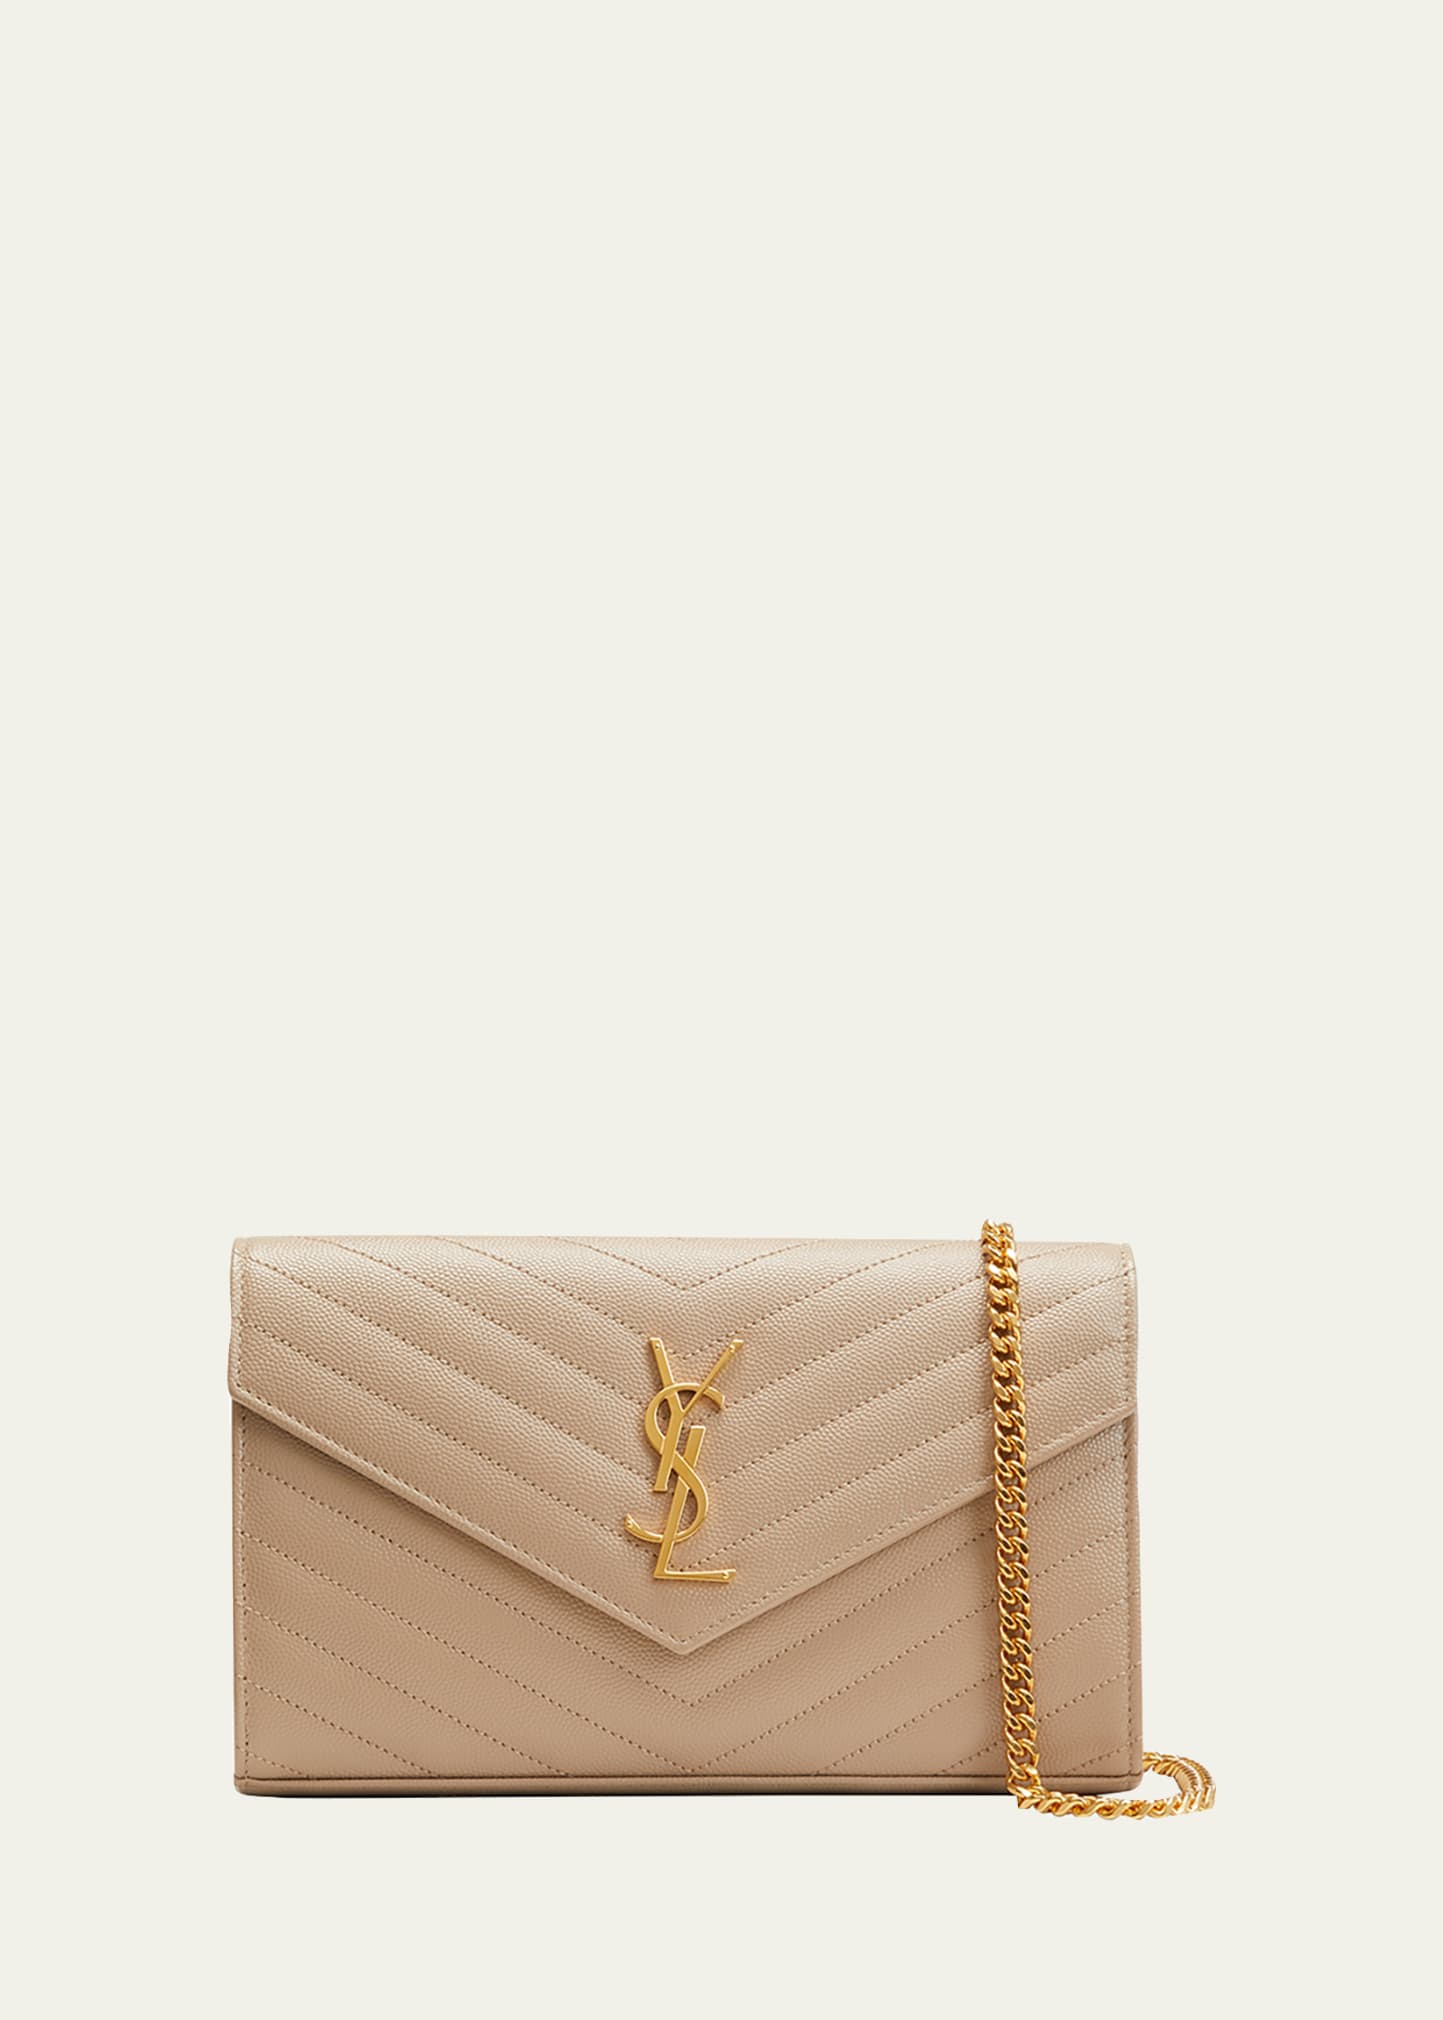 SAINT LAURENT YSL MONOGRAM LARGE WALLET ON CHAIN IN GRAINED LEATHER